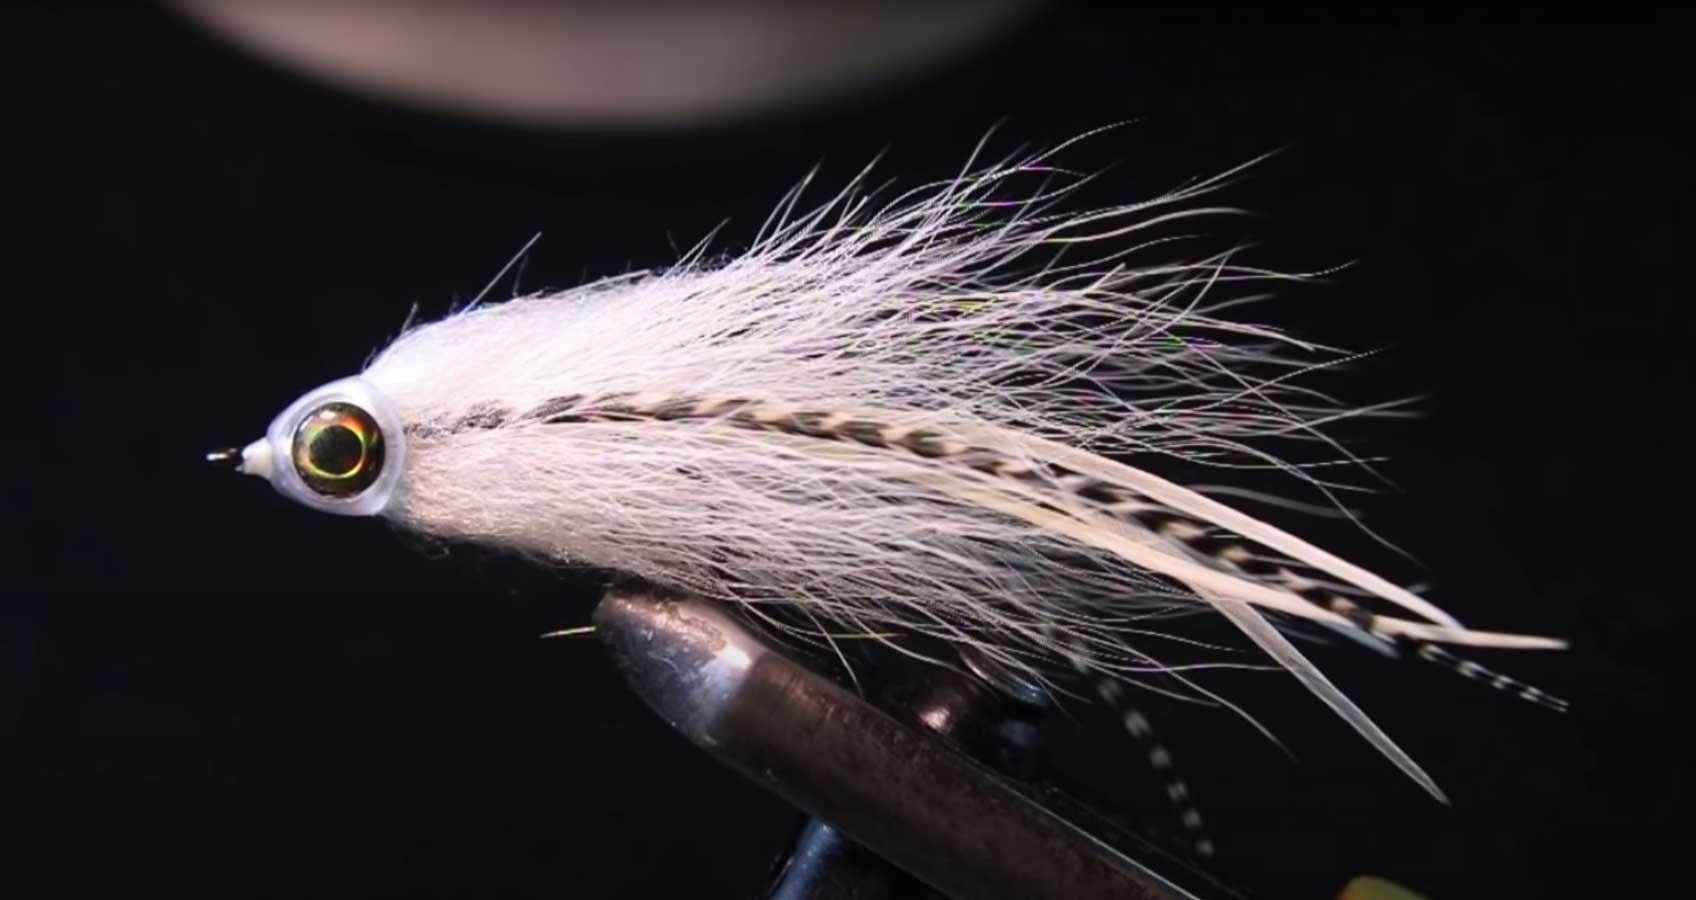 Using Trout Tactics for Smallmouth Bass - The View From Harrys Window - A  Fly Fishing Blog